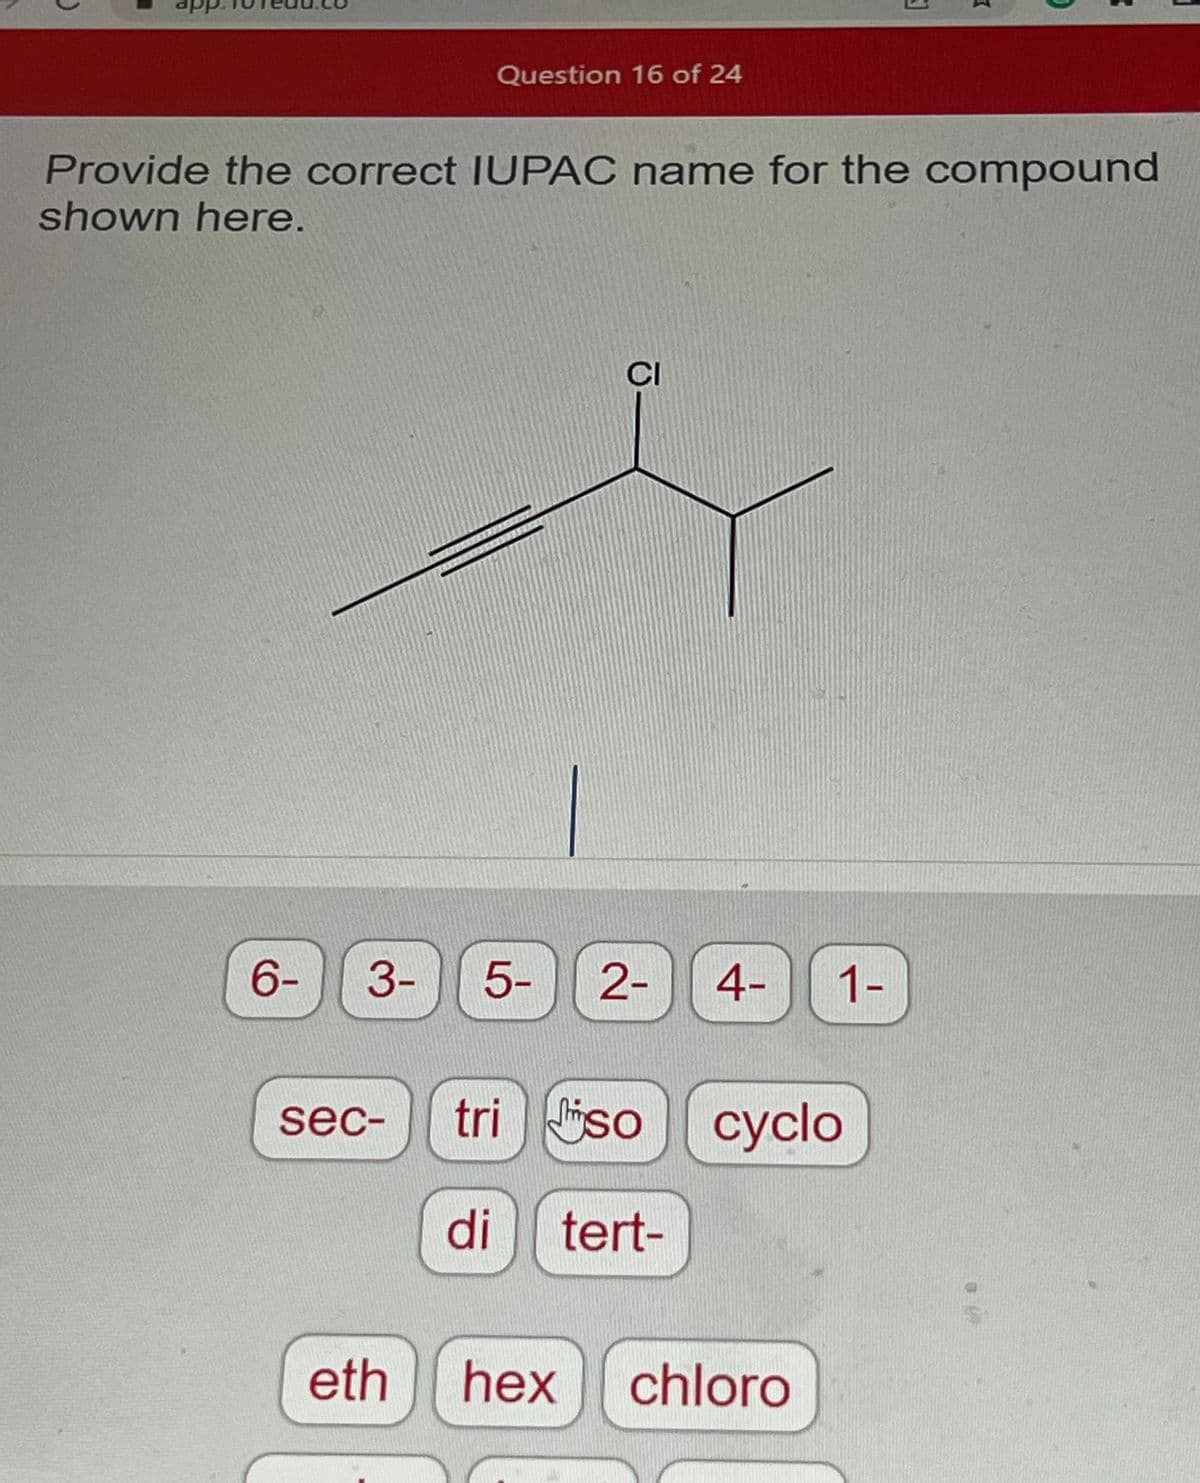 app.
6-
Question 16 of 24
Provide the correct IUPAC name for the compound
shown here.
CI
3- 5- 2-
eth
4- 1-
sec- tri so cyclo
di tert-
J
hex chloro
7
73
3